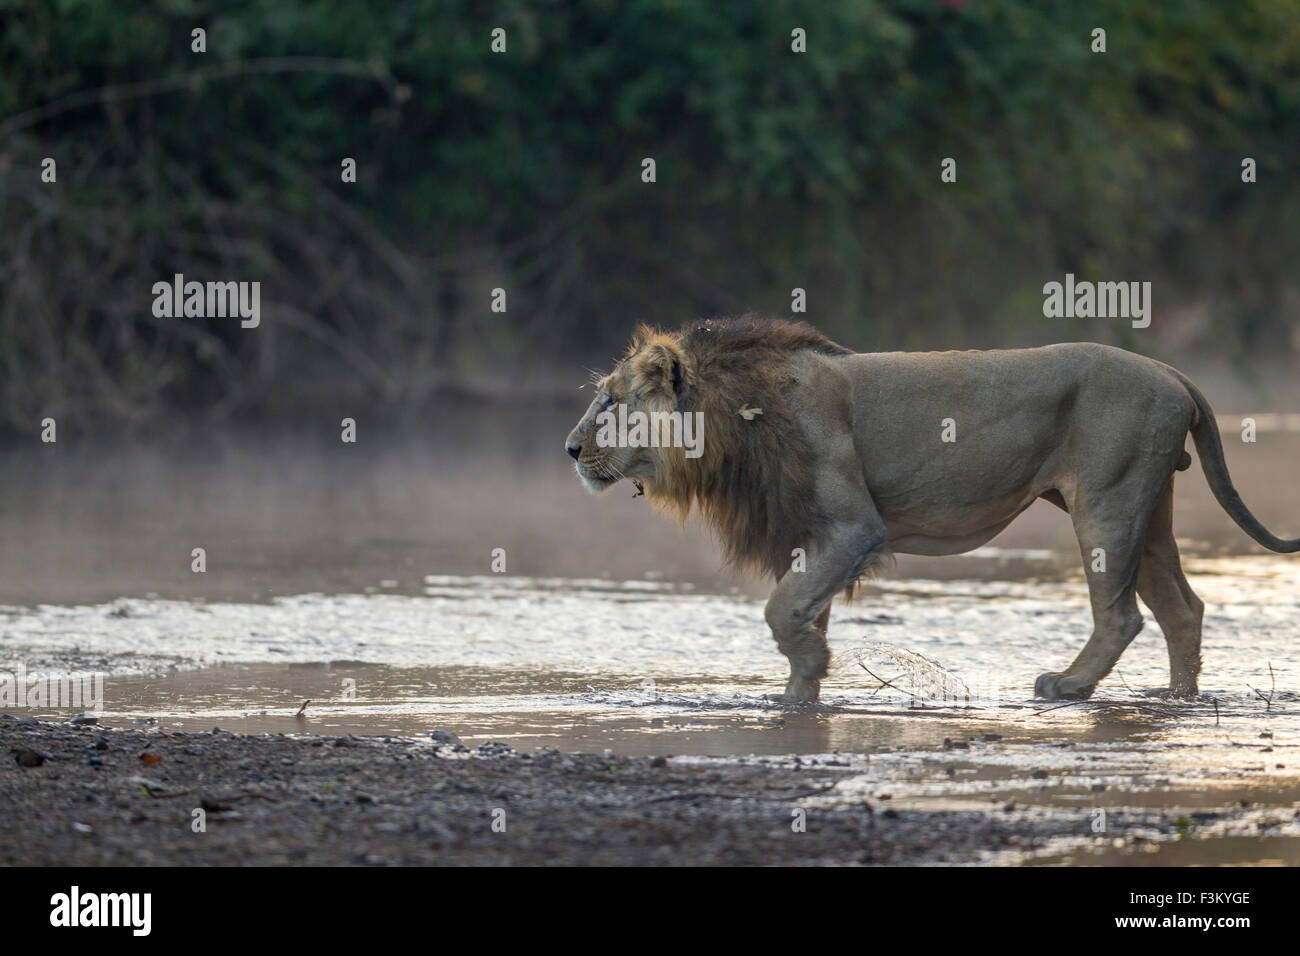 Asiatic Lion crossing a lake (Panthera leo persica) at Gir forest, Gujarat, India. Stock Photo